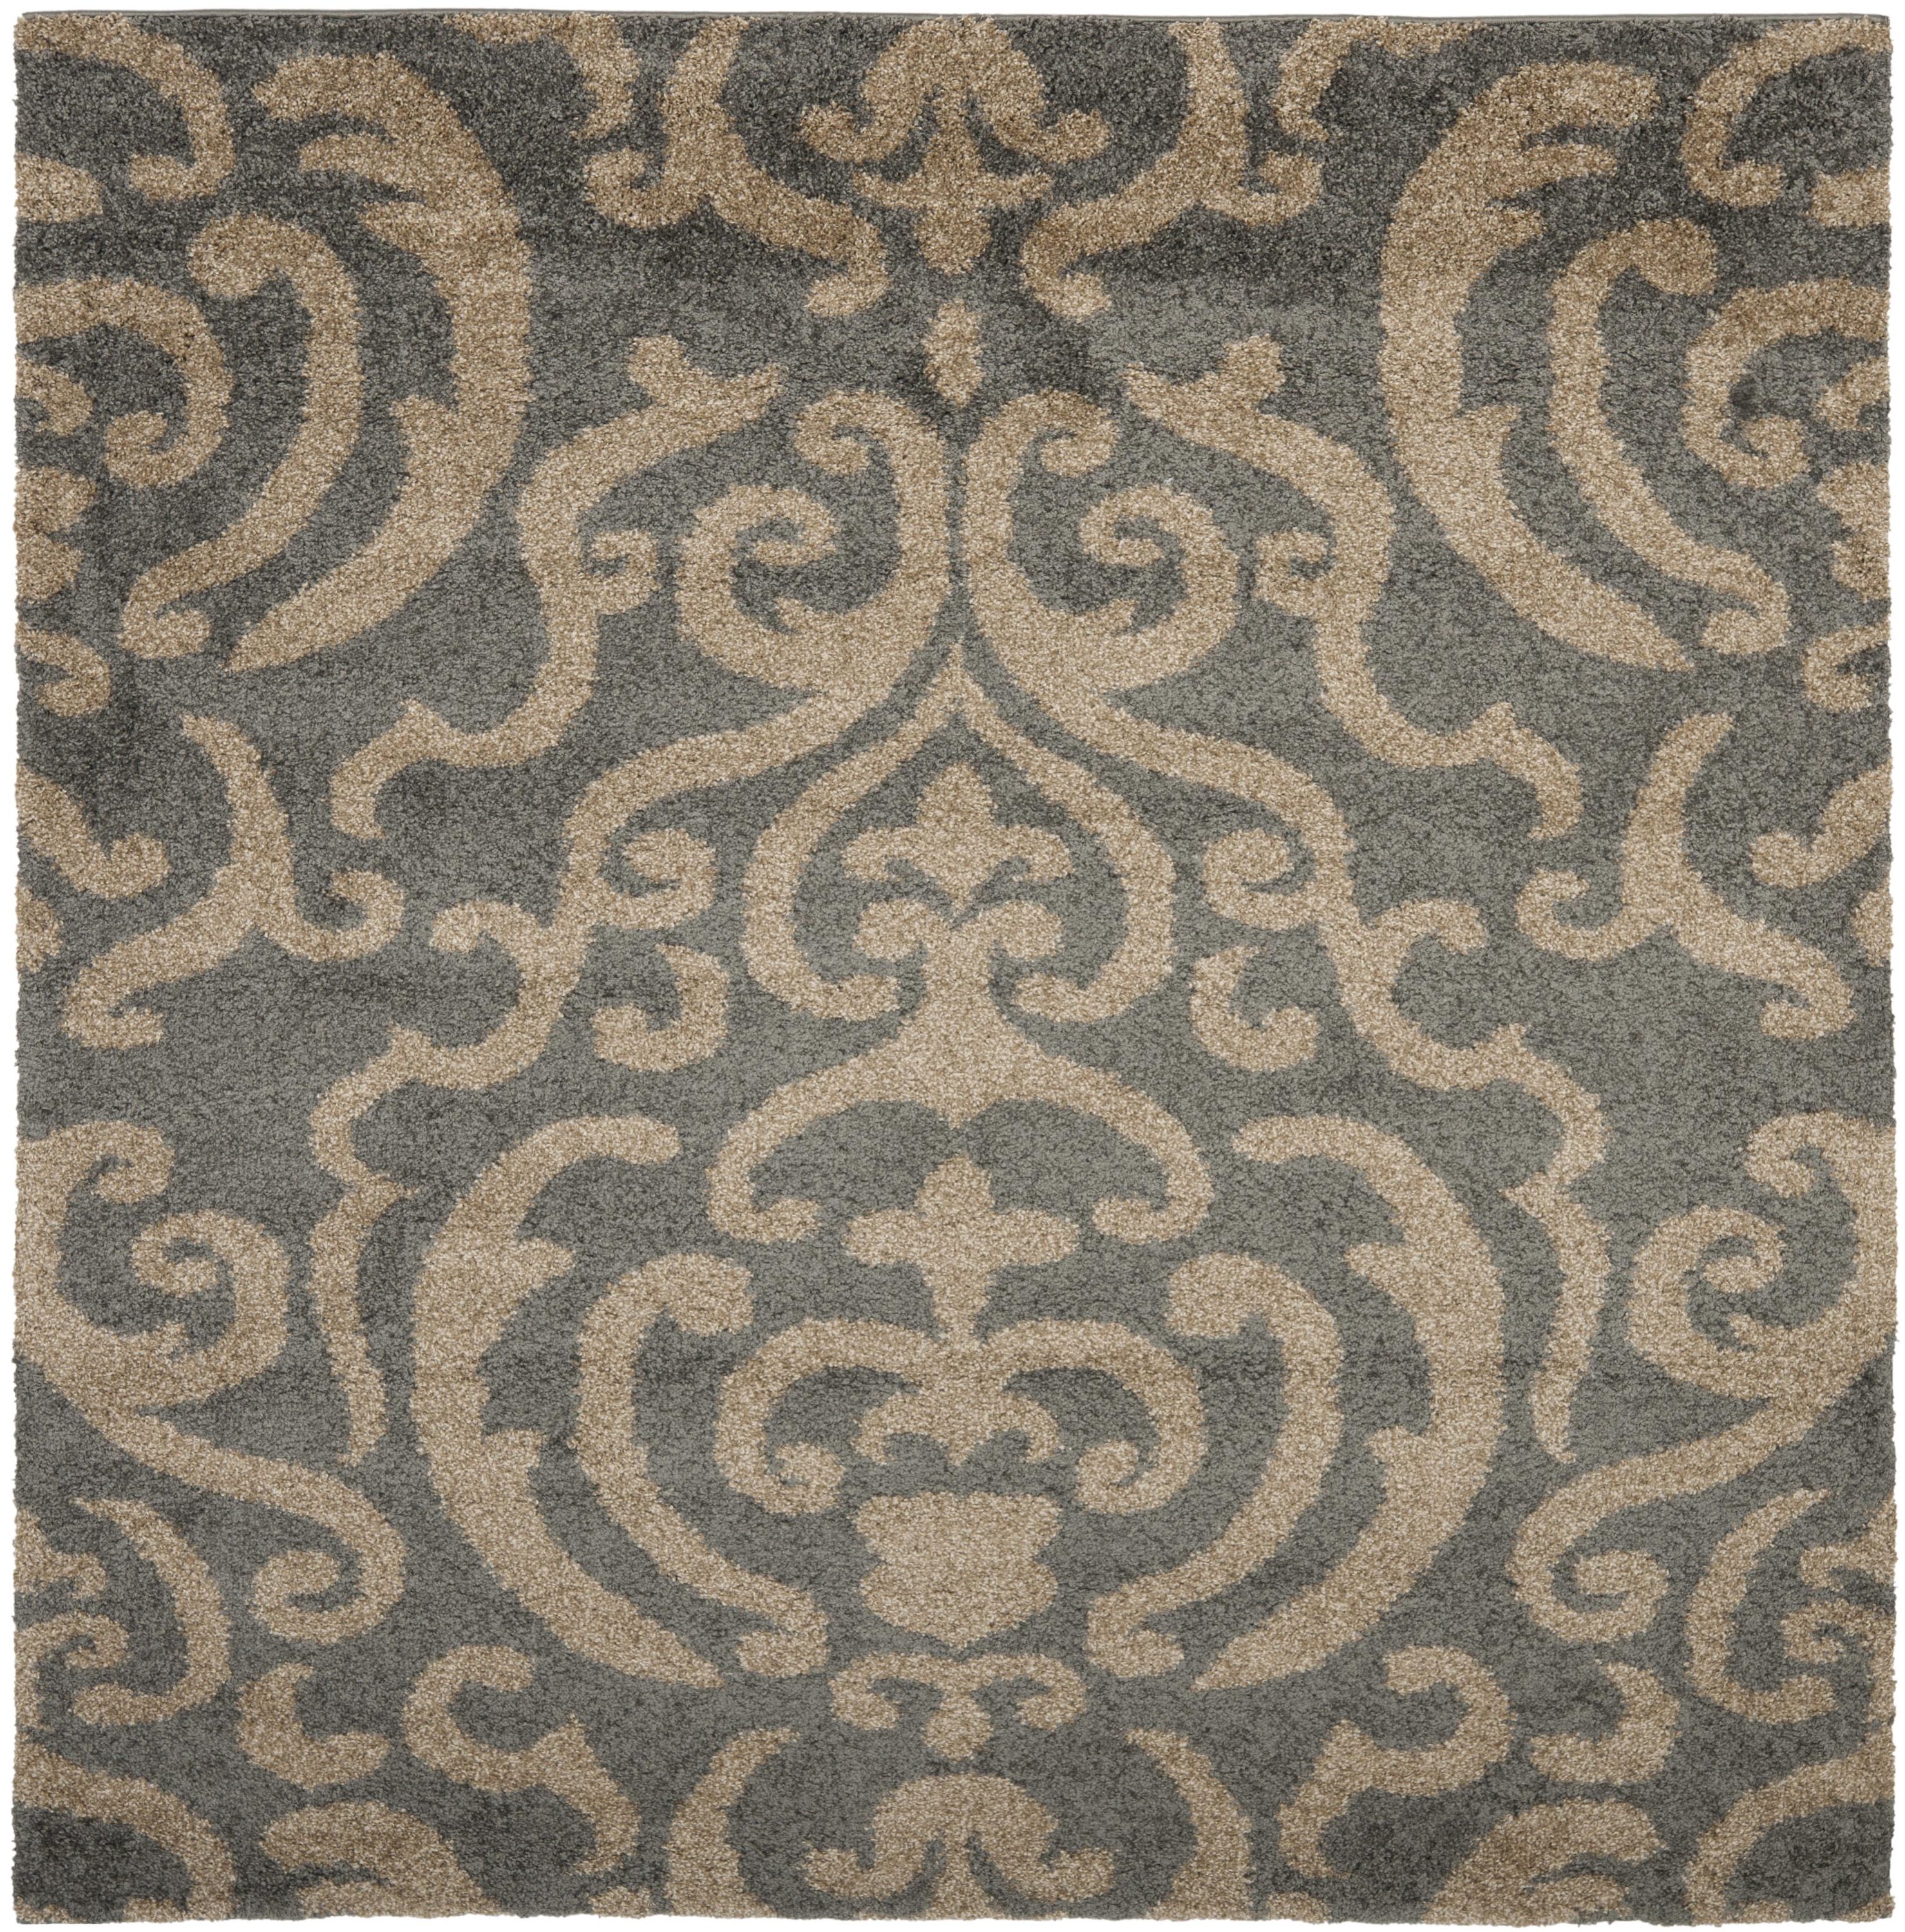 Safavieh 7 x 7 Gray/Beige Square Indoor Damask Area Rug in the Rugs ...